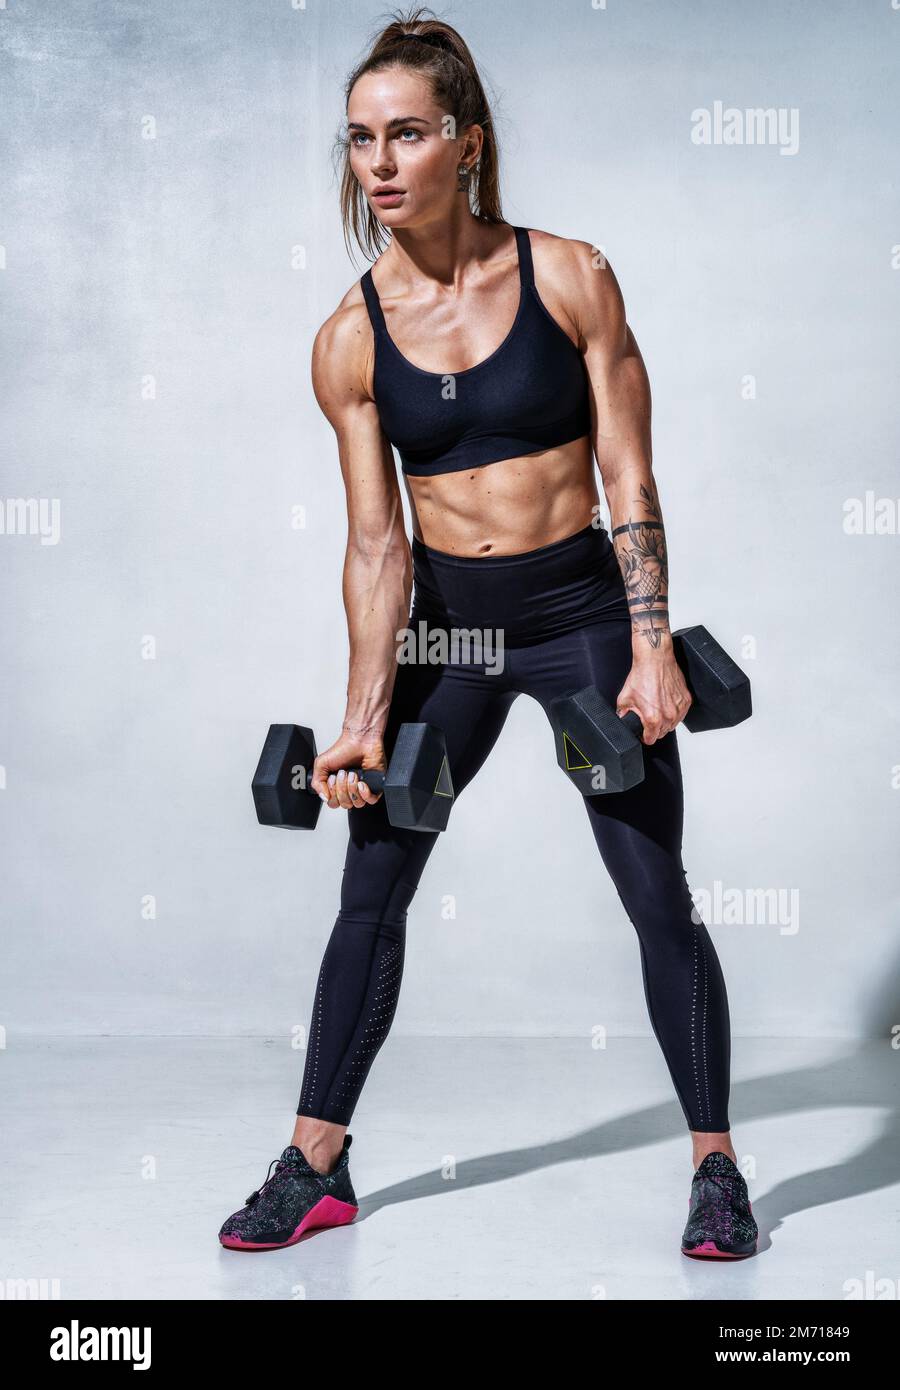 Sporty woman resting after workout with dumbbells. Photo of woman with good physique on grey background. Strength and motivation. Full length Stock Photo